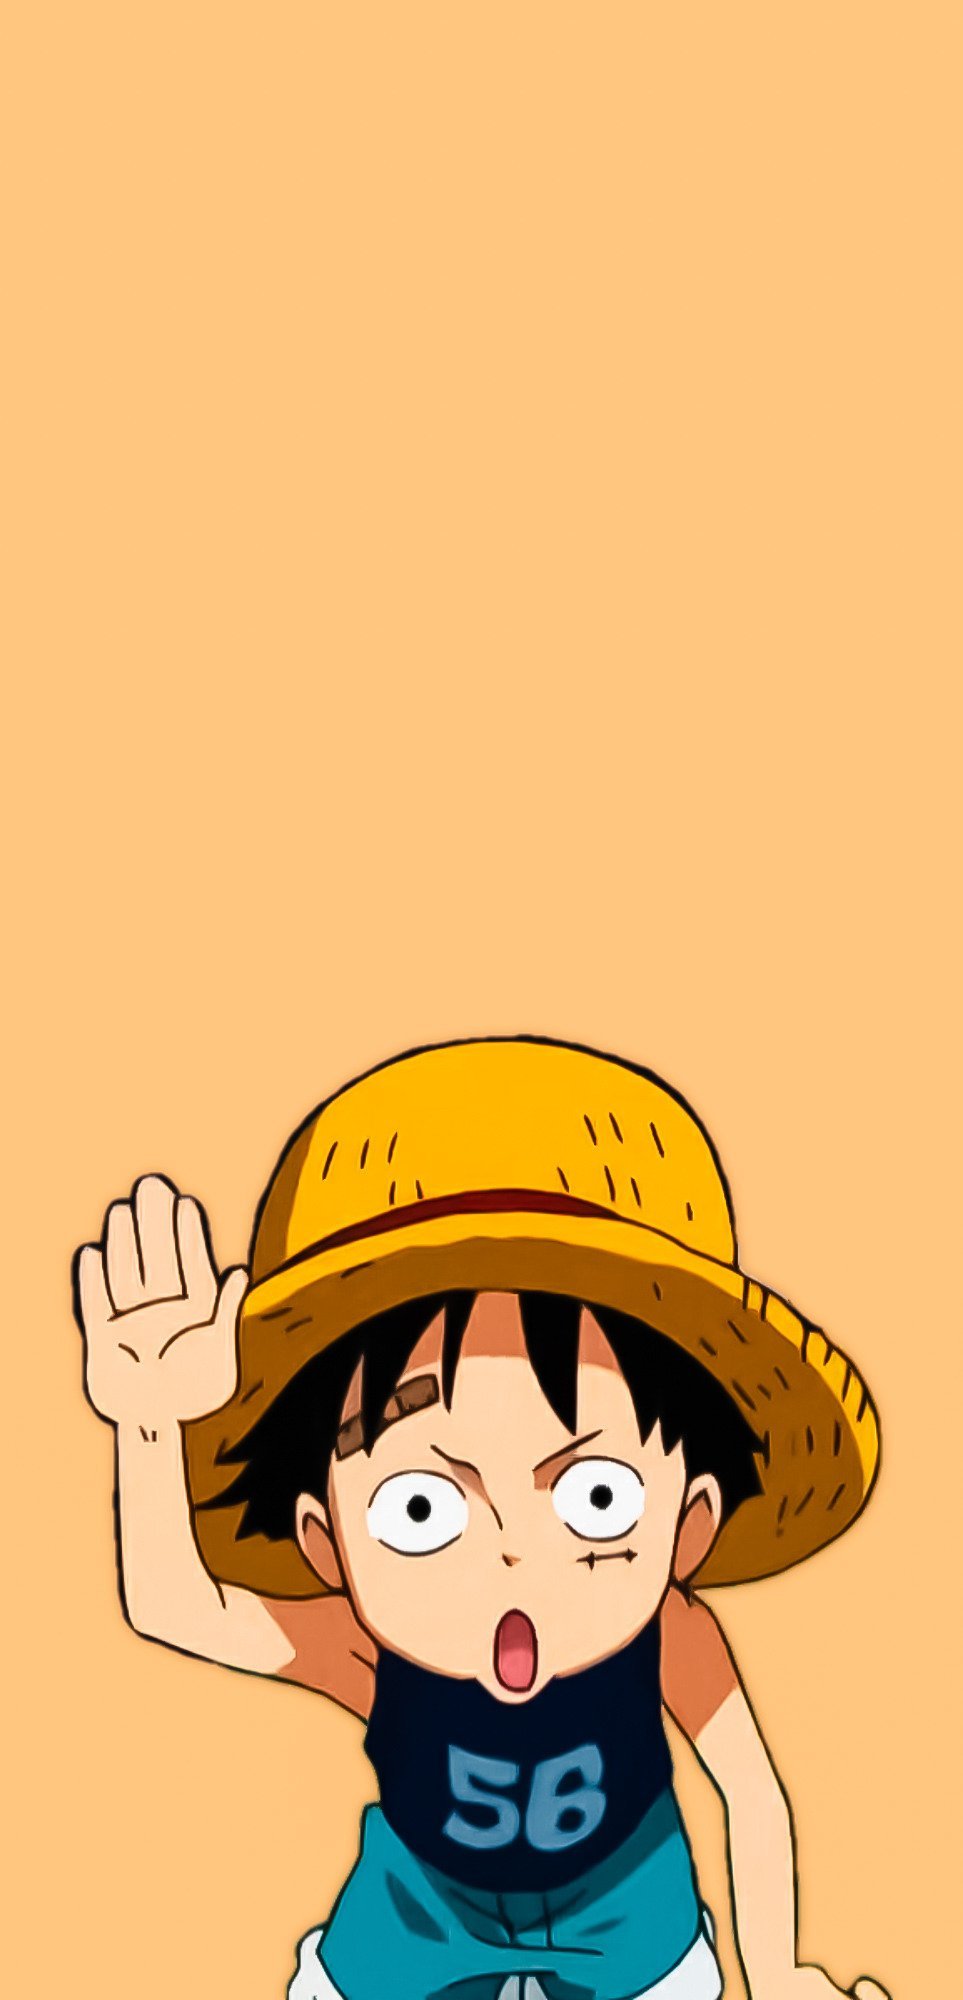 Ace Sabo Luffy One Piece Live Wallpaper - MoeWalls